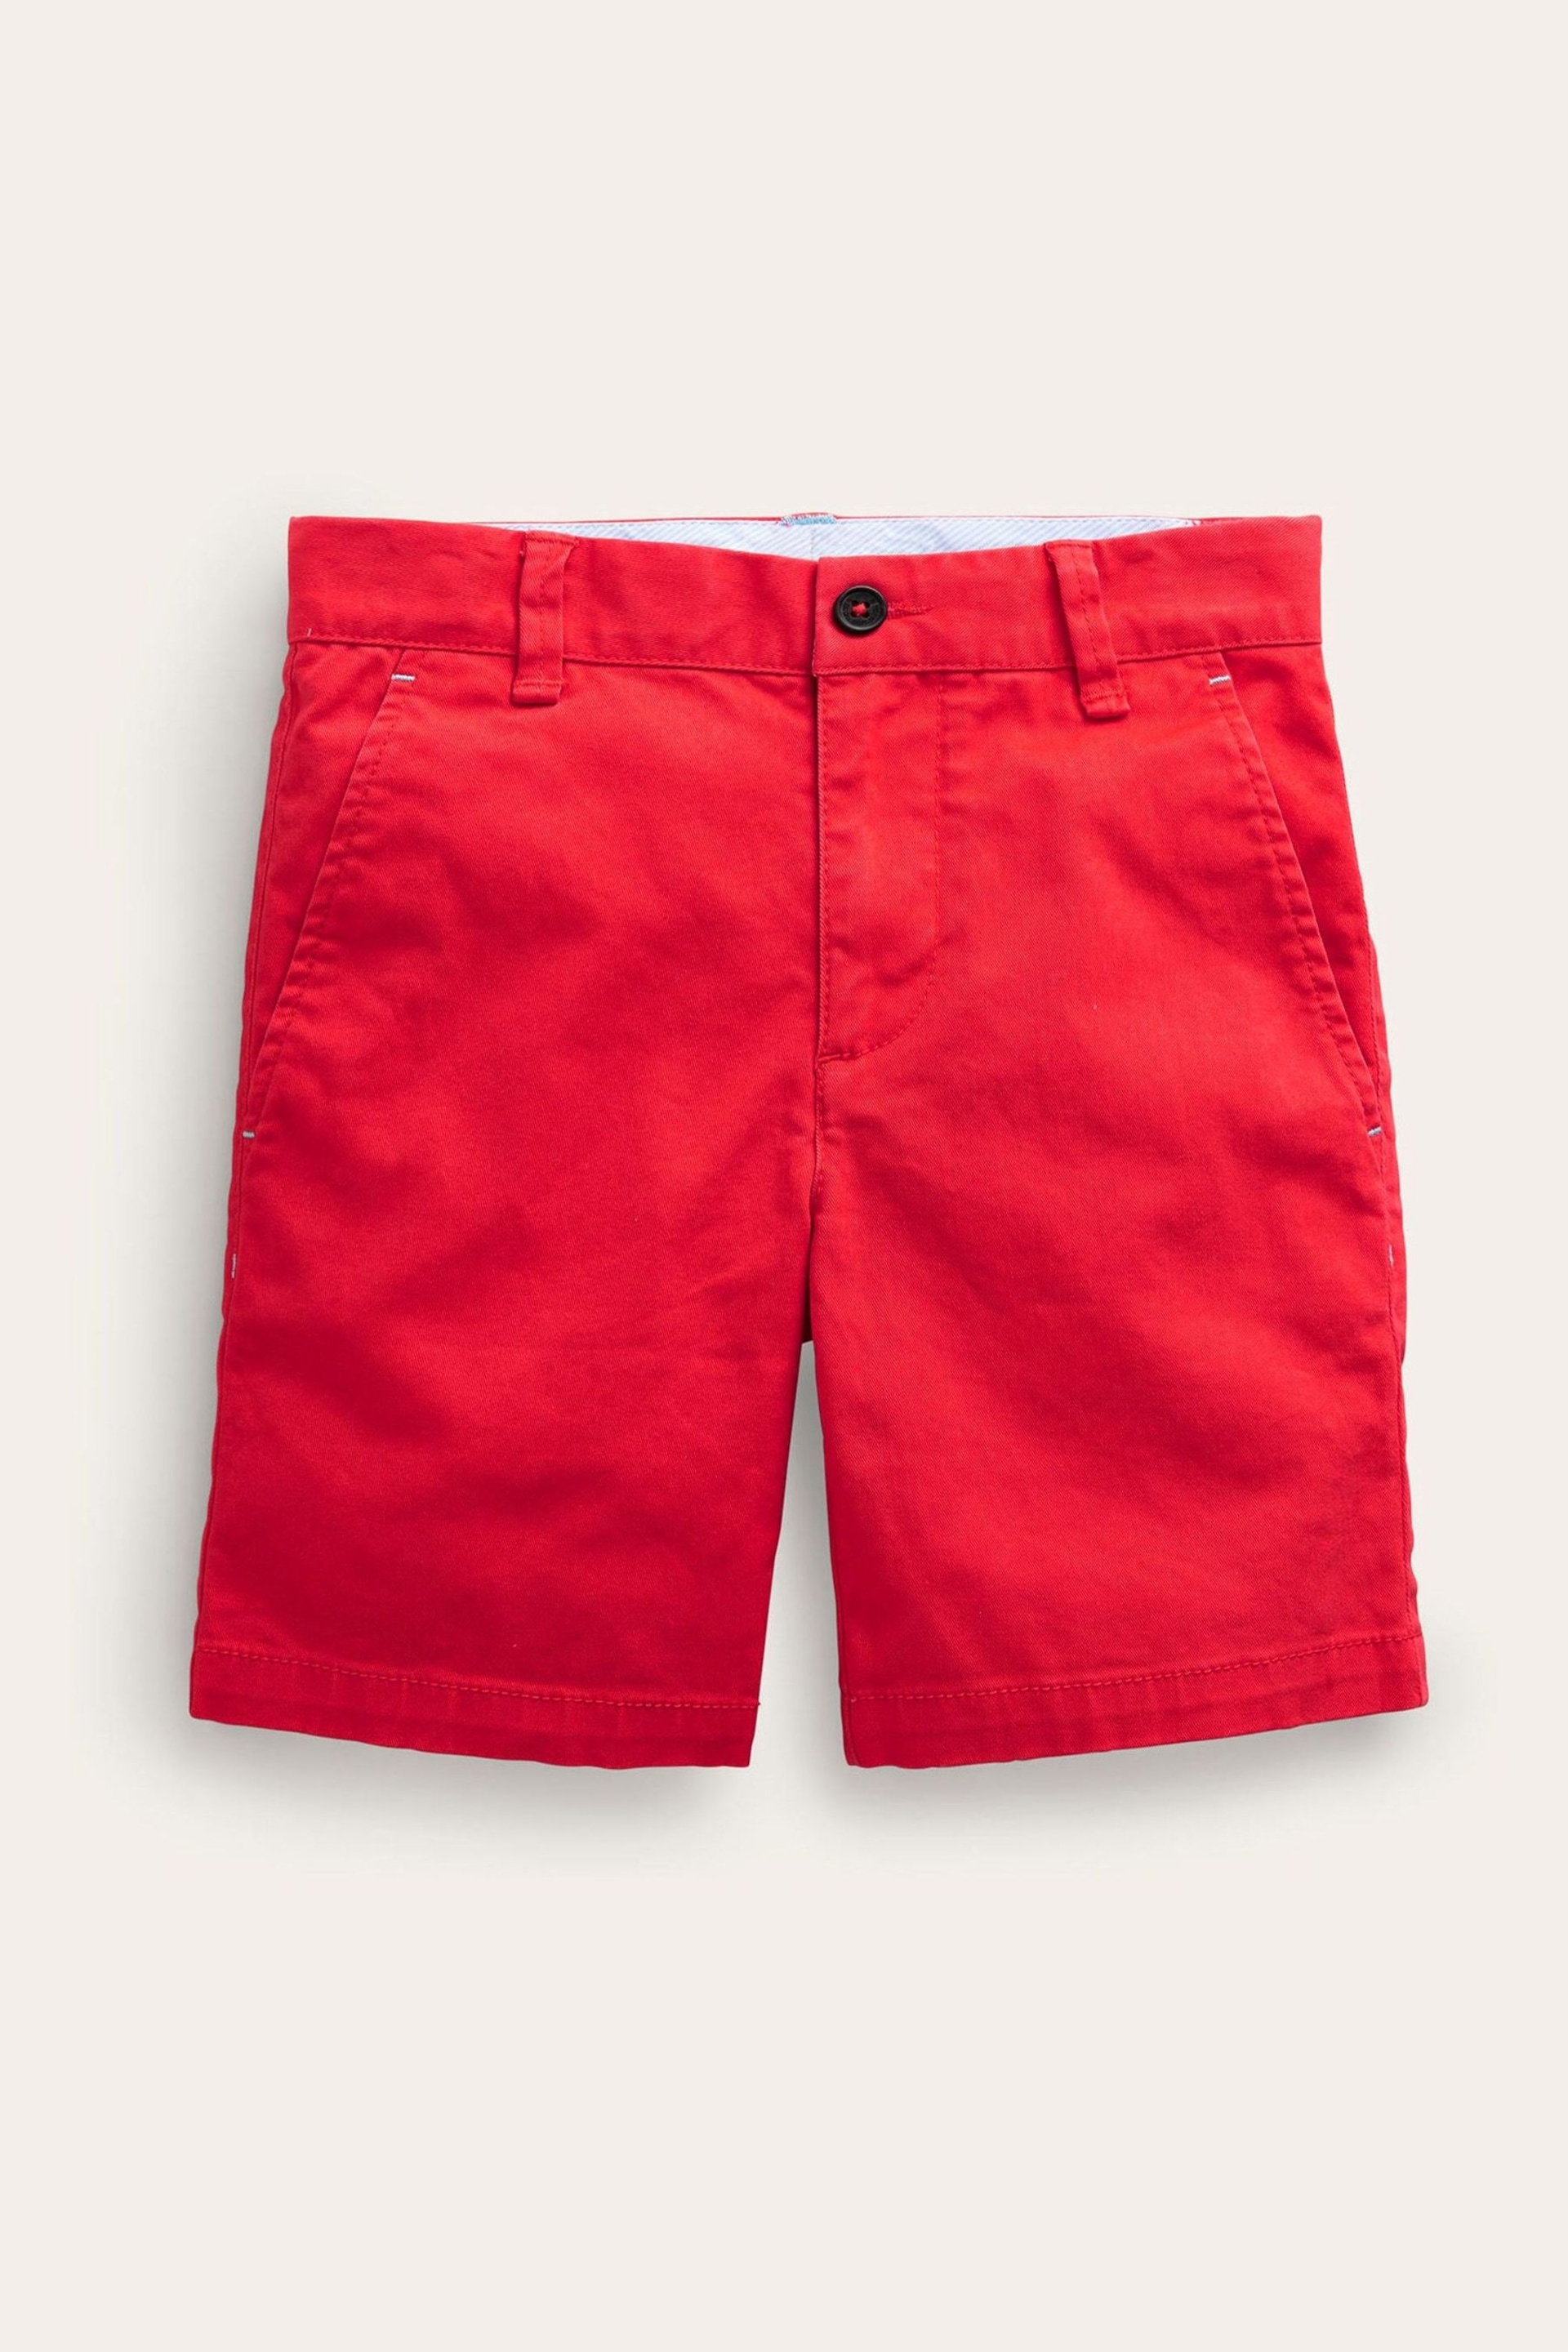 Boden Red Classic Chino Shorts - Image 1 of 3